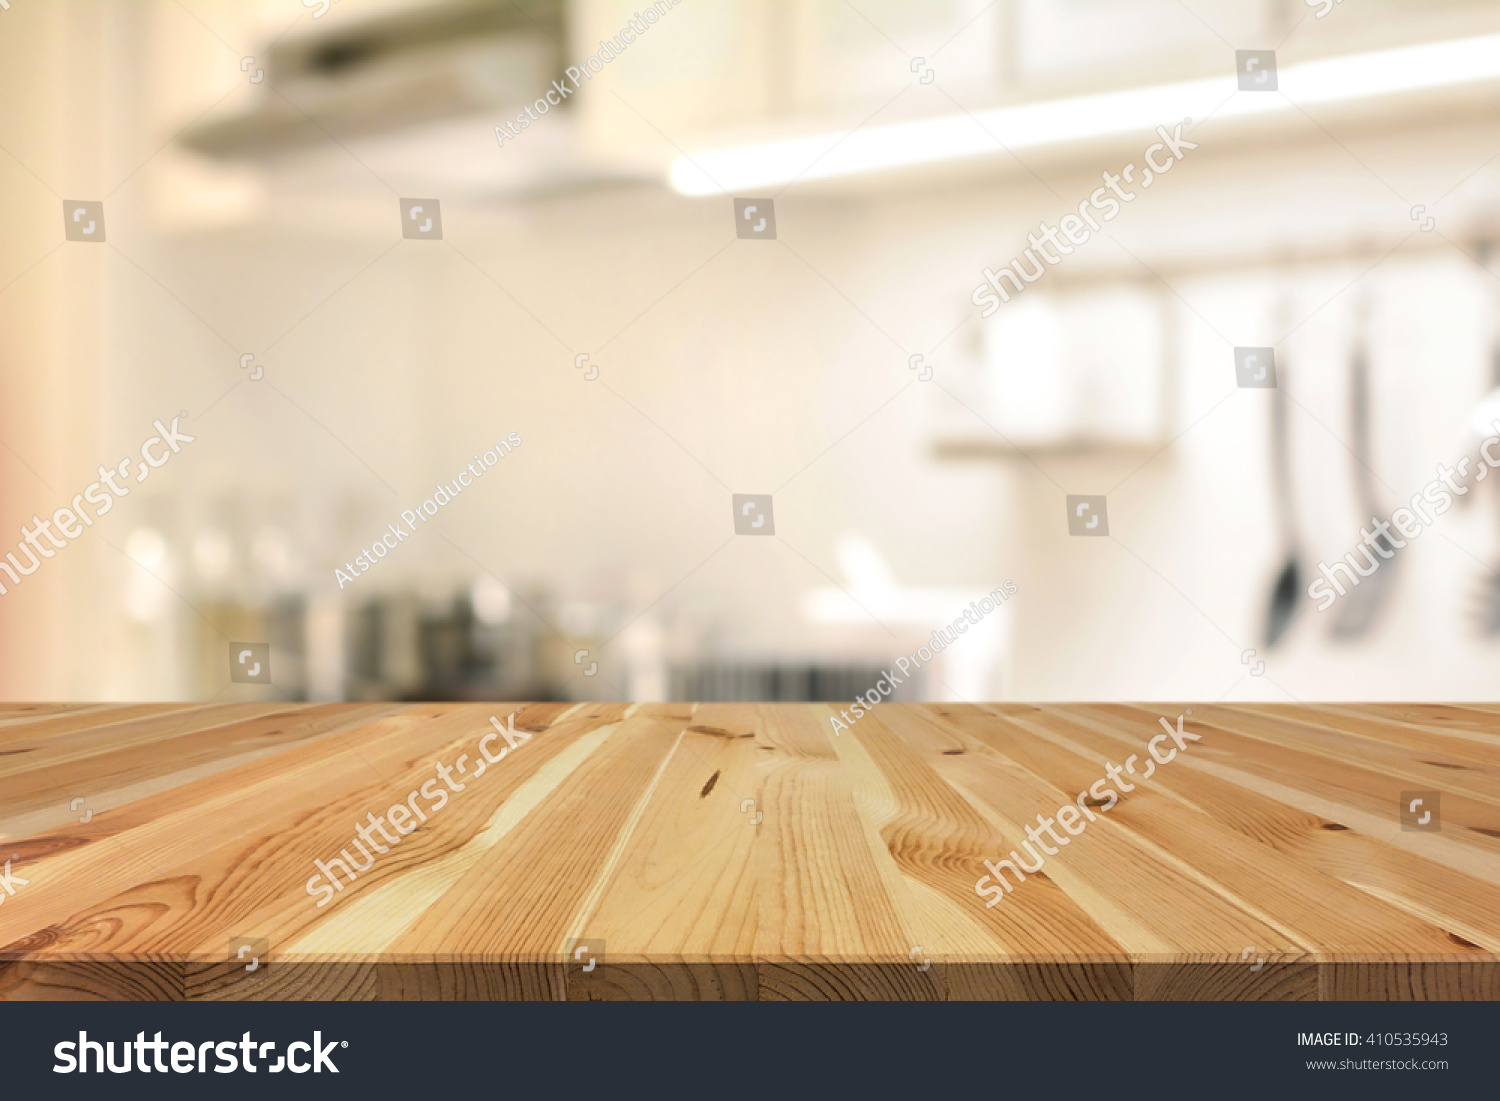 Wood Table Top As Kitchen Island Stock Photo (Edit Now) 410535943 ...